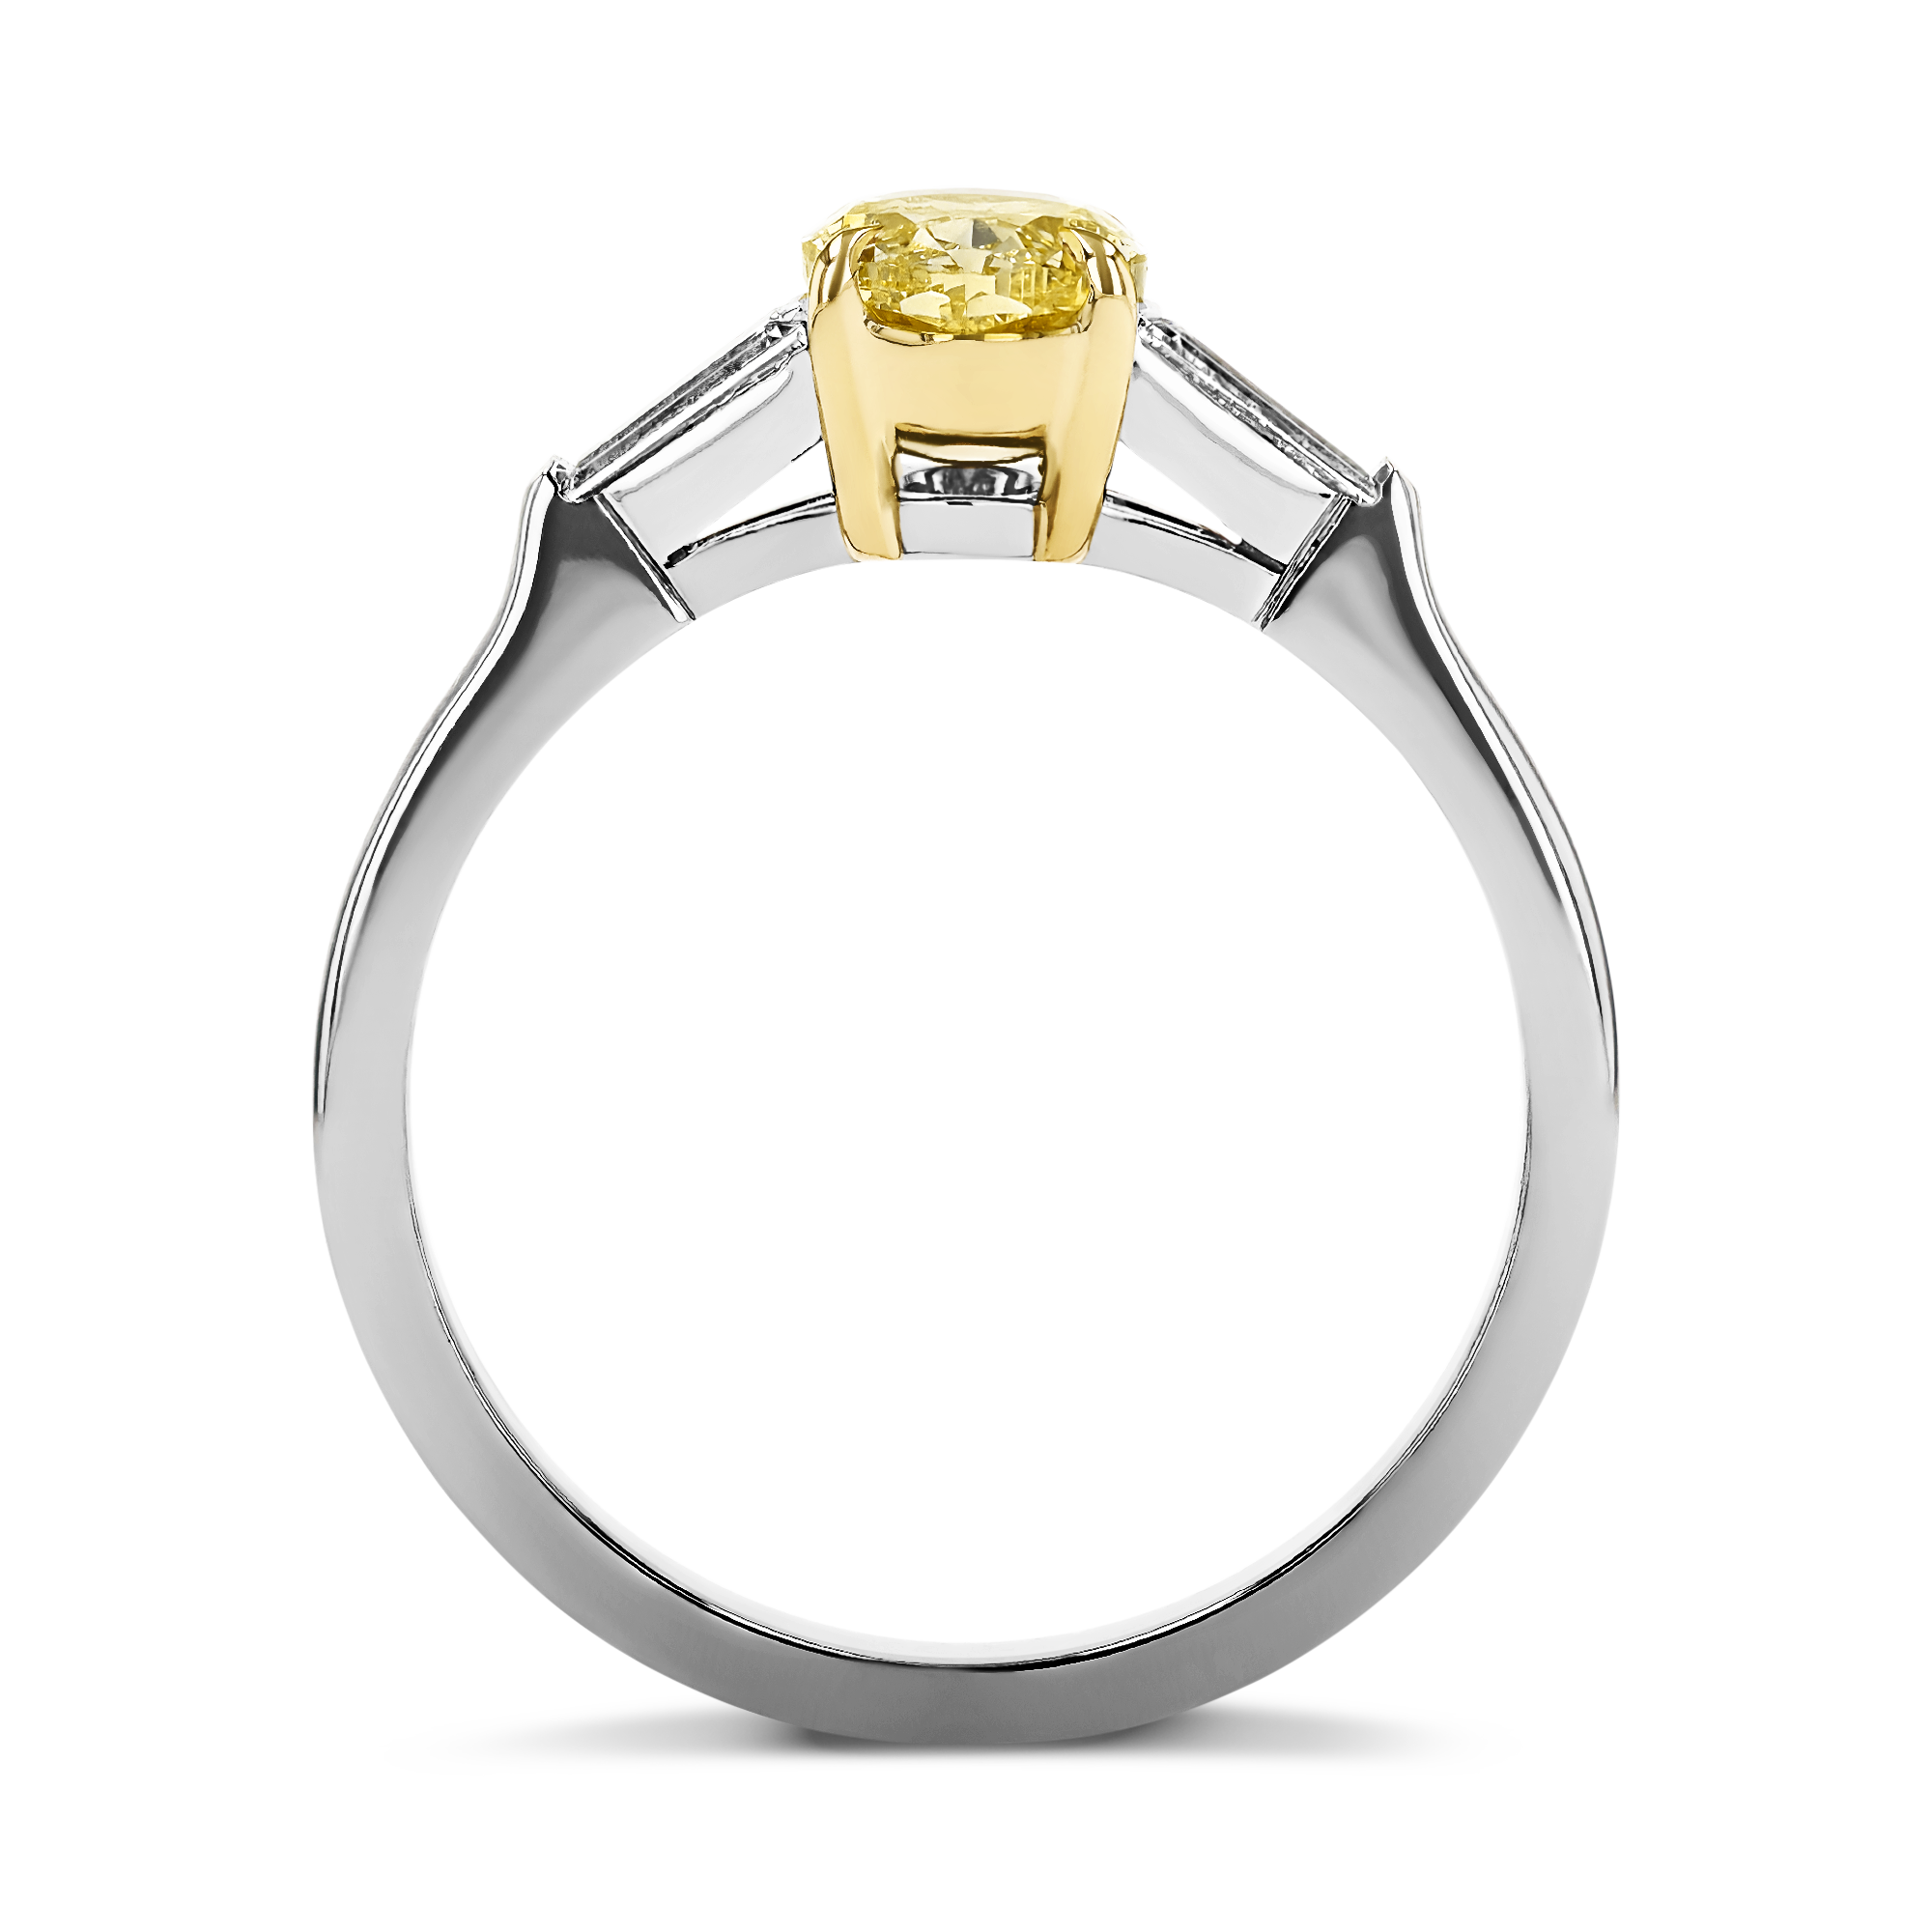 Regency 1.01ct Fancy Yellow Diamond Solitaire Ring Oval Cut, Claw Set_3